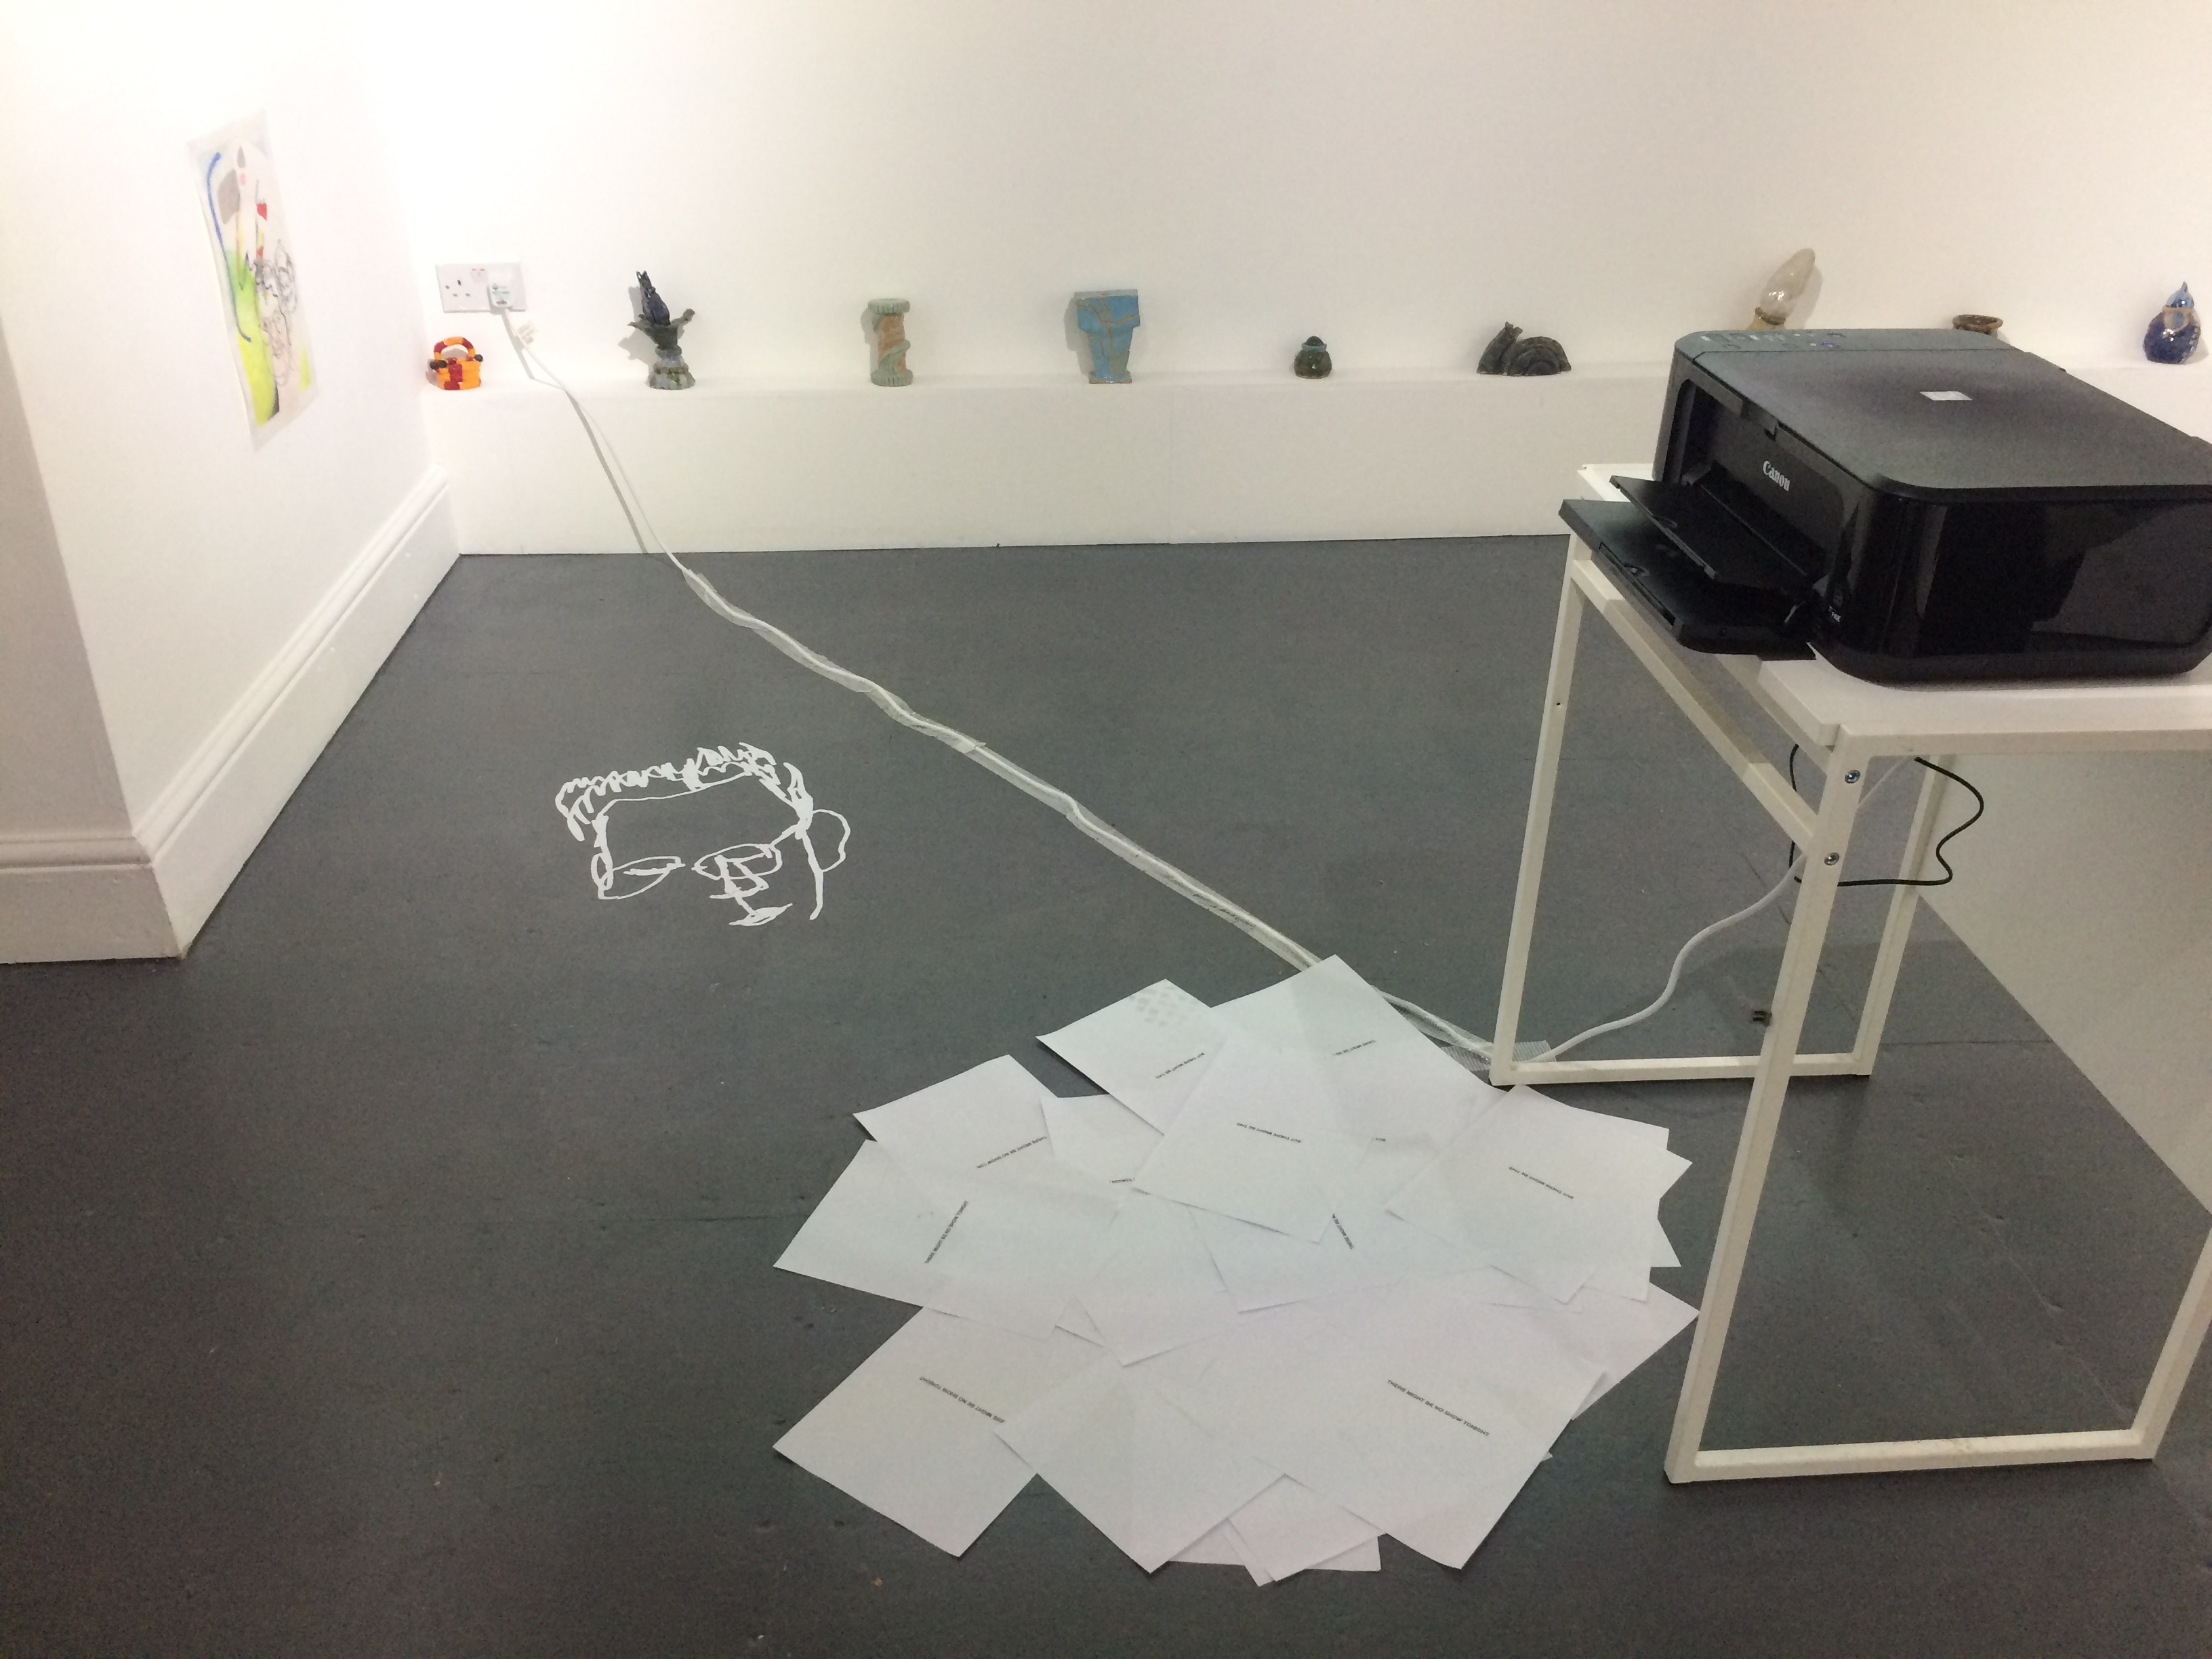 A gallery space with white walls and grey floor. A printer on a plinth prints out sheets of paper with small sentences of text on. There is a small chalk drawing on the floor. Around the edge of the room, small ceramics rest on a ledge.